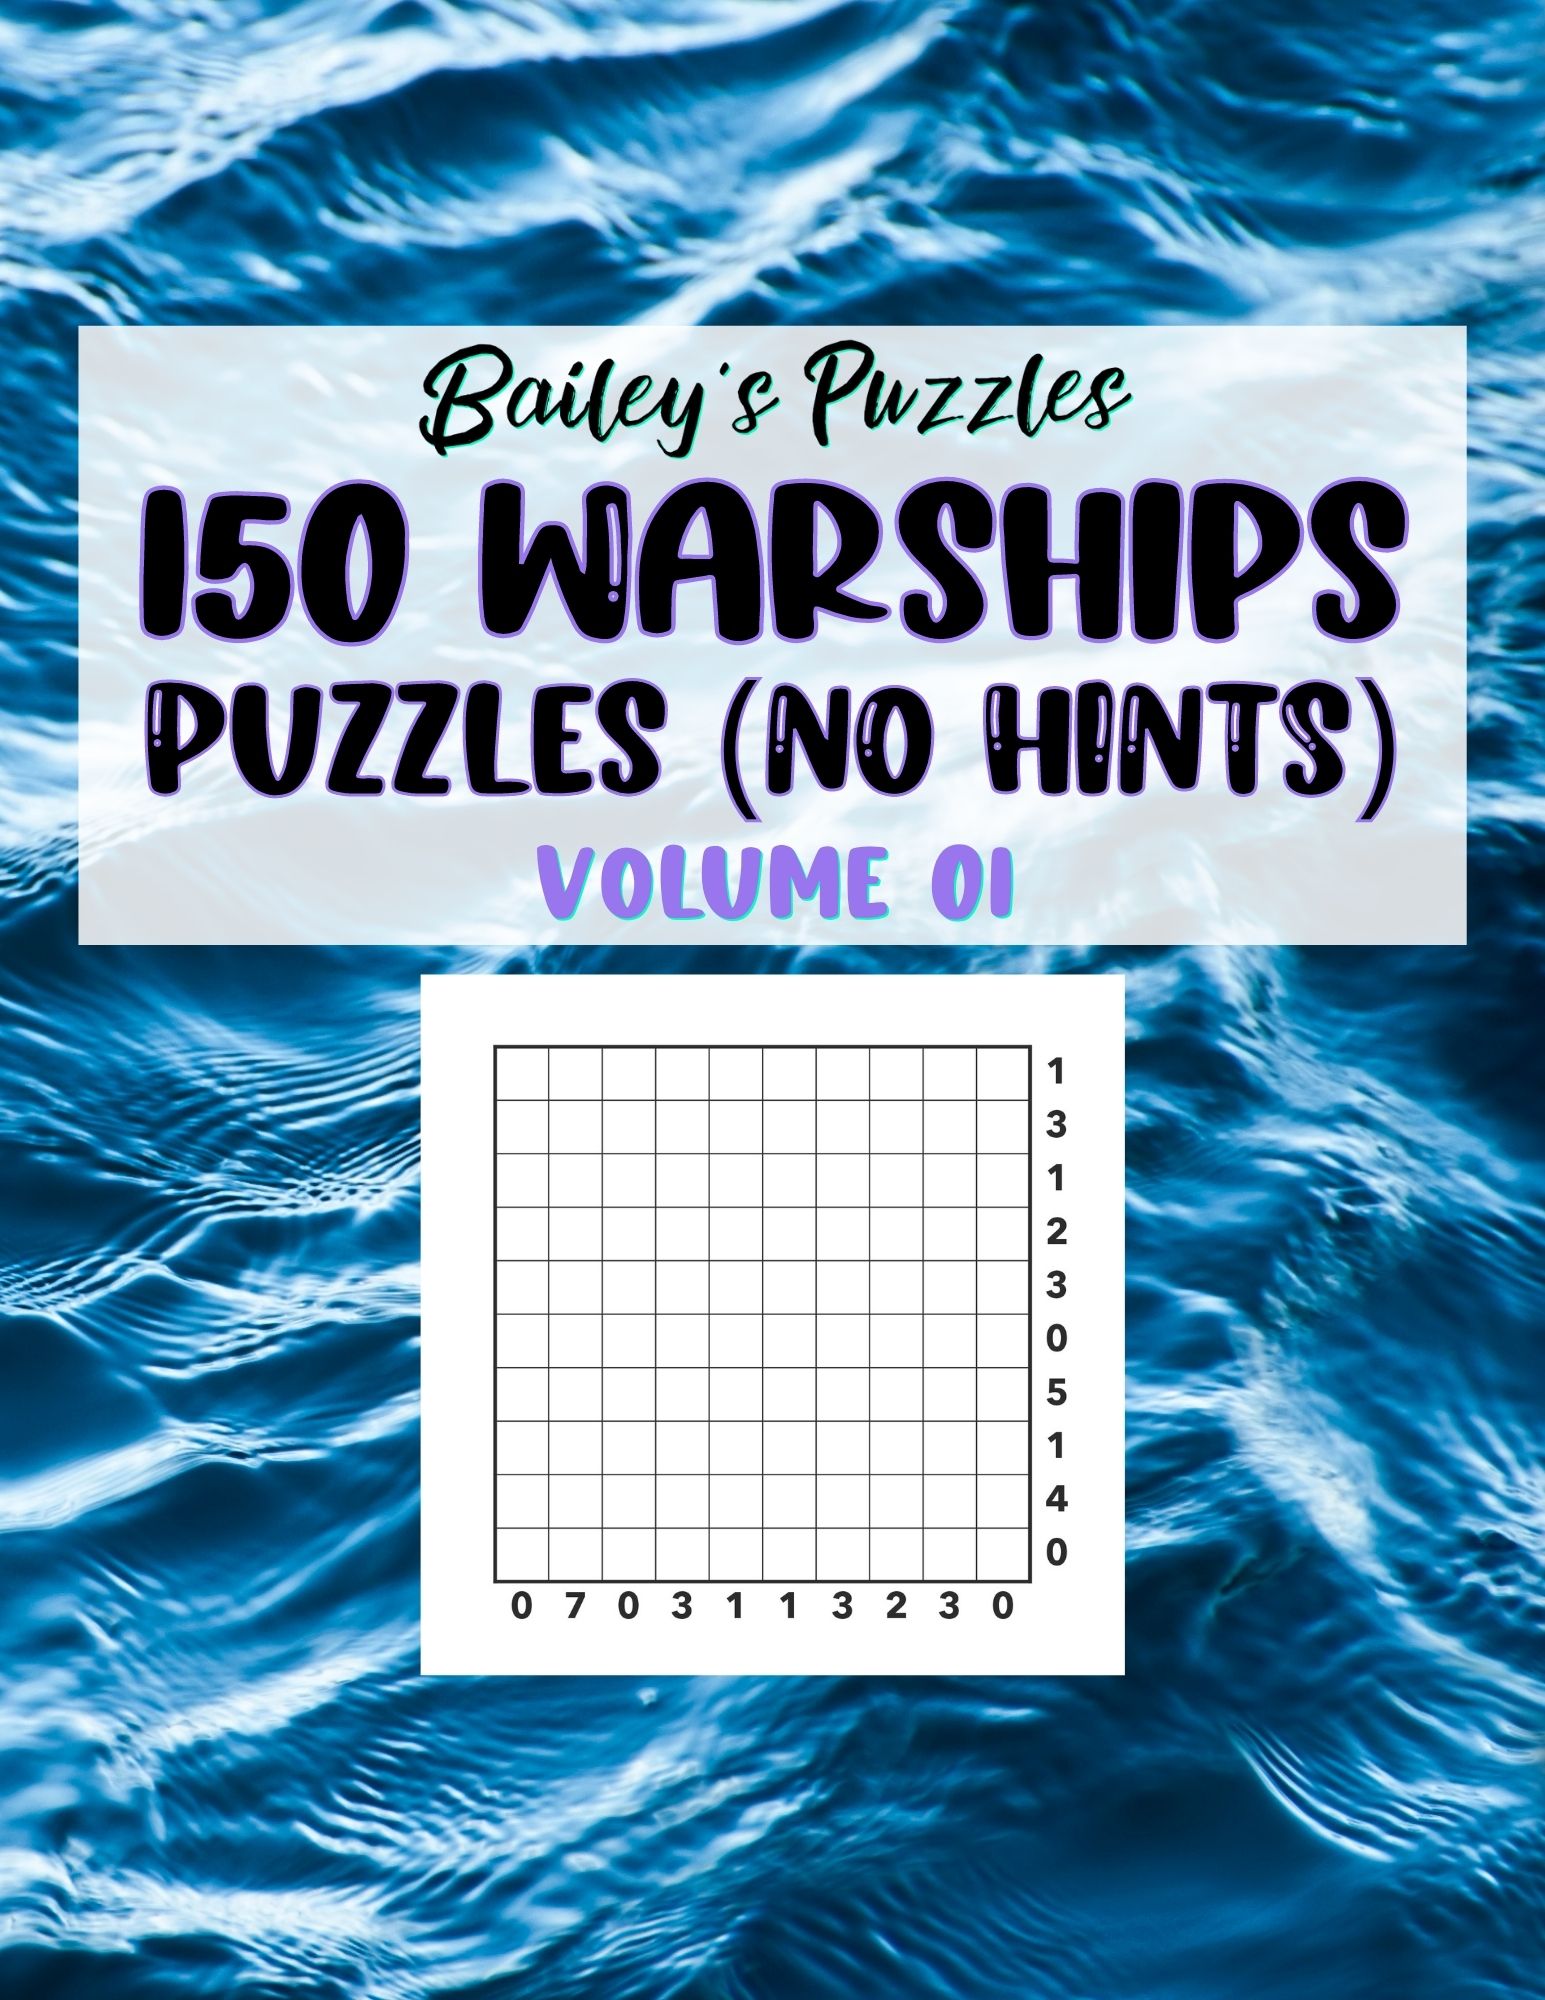 Front Cover - 150 Warships Puzzles (no hints)